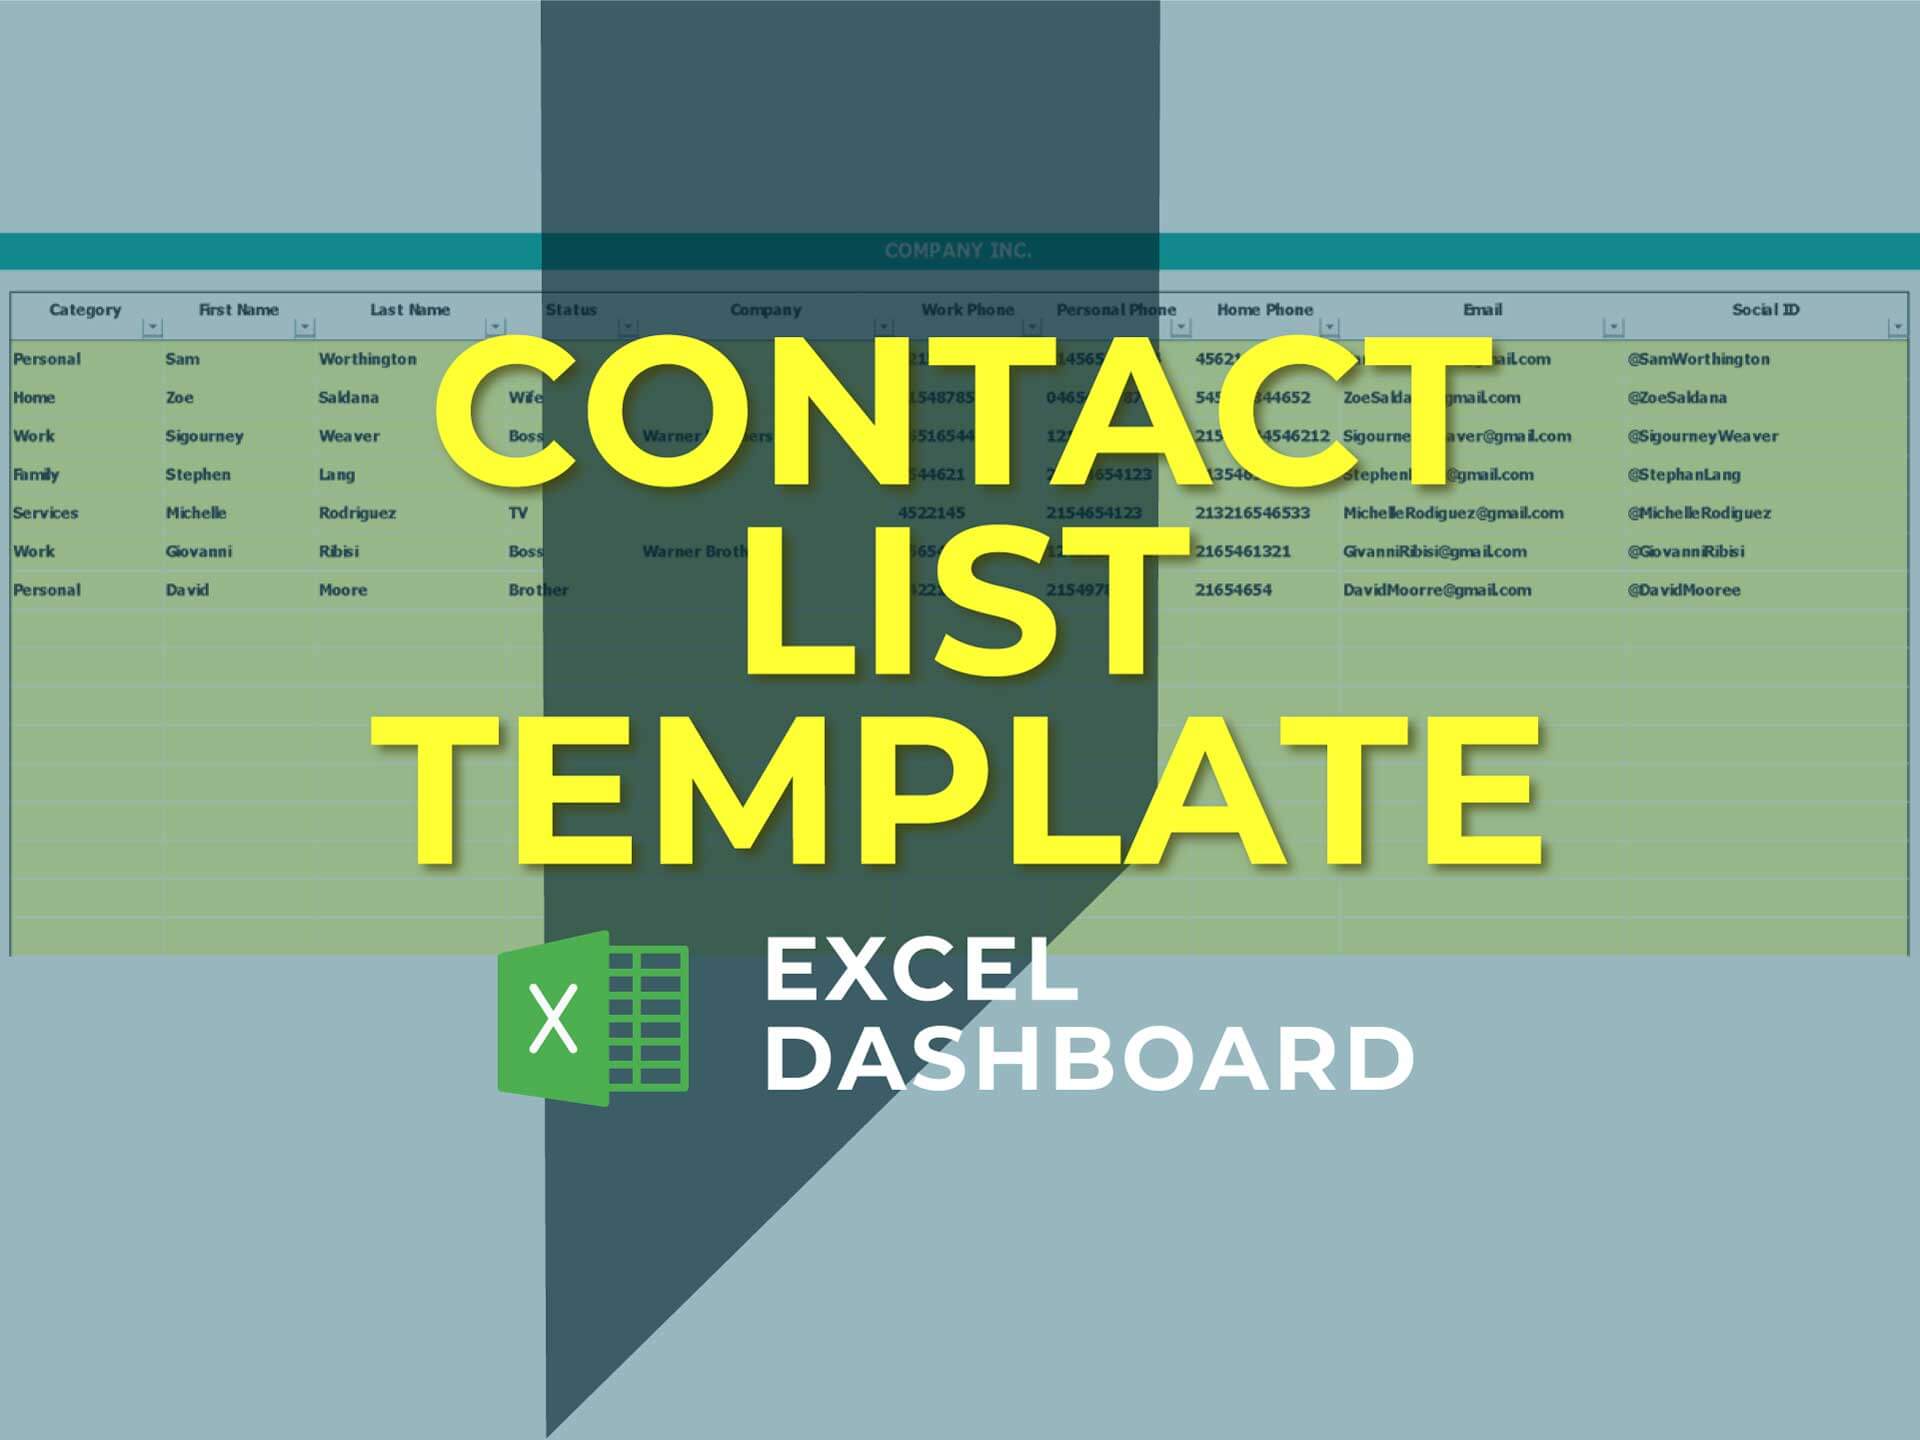 excel-contact-list-template-easily-track-contacts-excel-dashboards